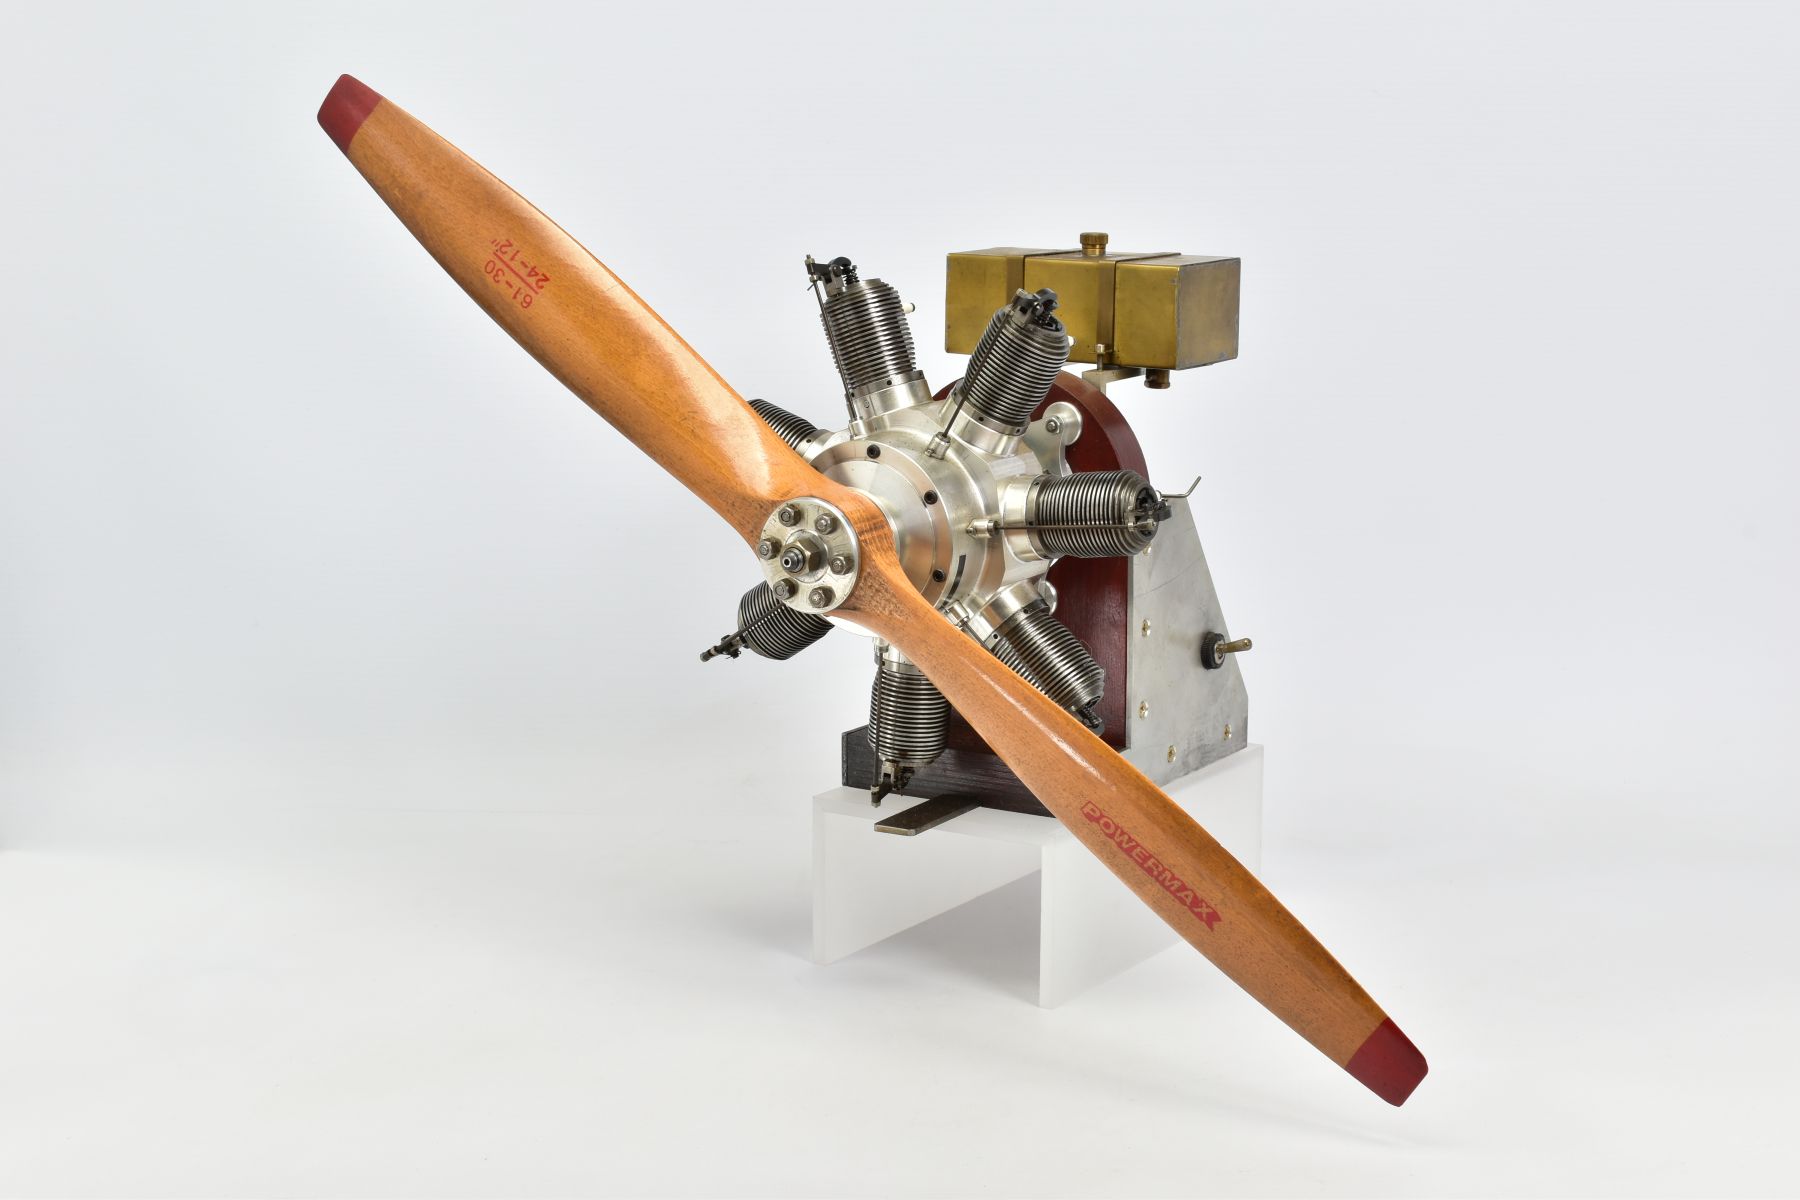 A HANDBUILT MODEL SEVEN CYLINDER RADIAL AIRCRAFT ENGINE, not tested, constructed and finished to a